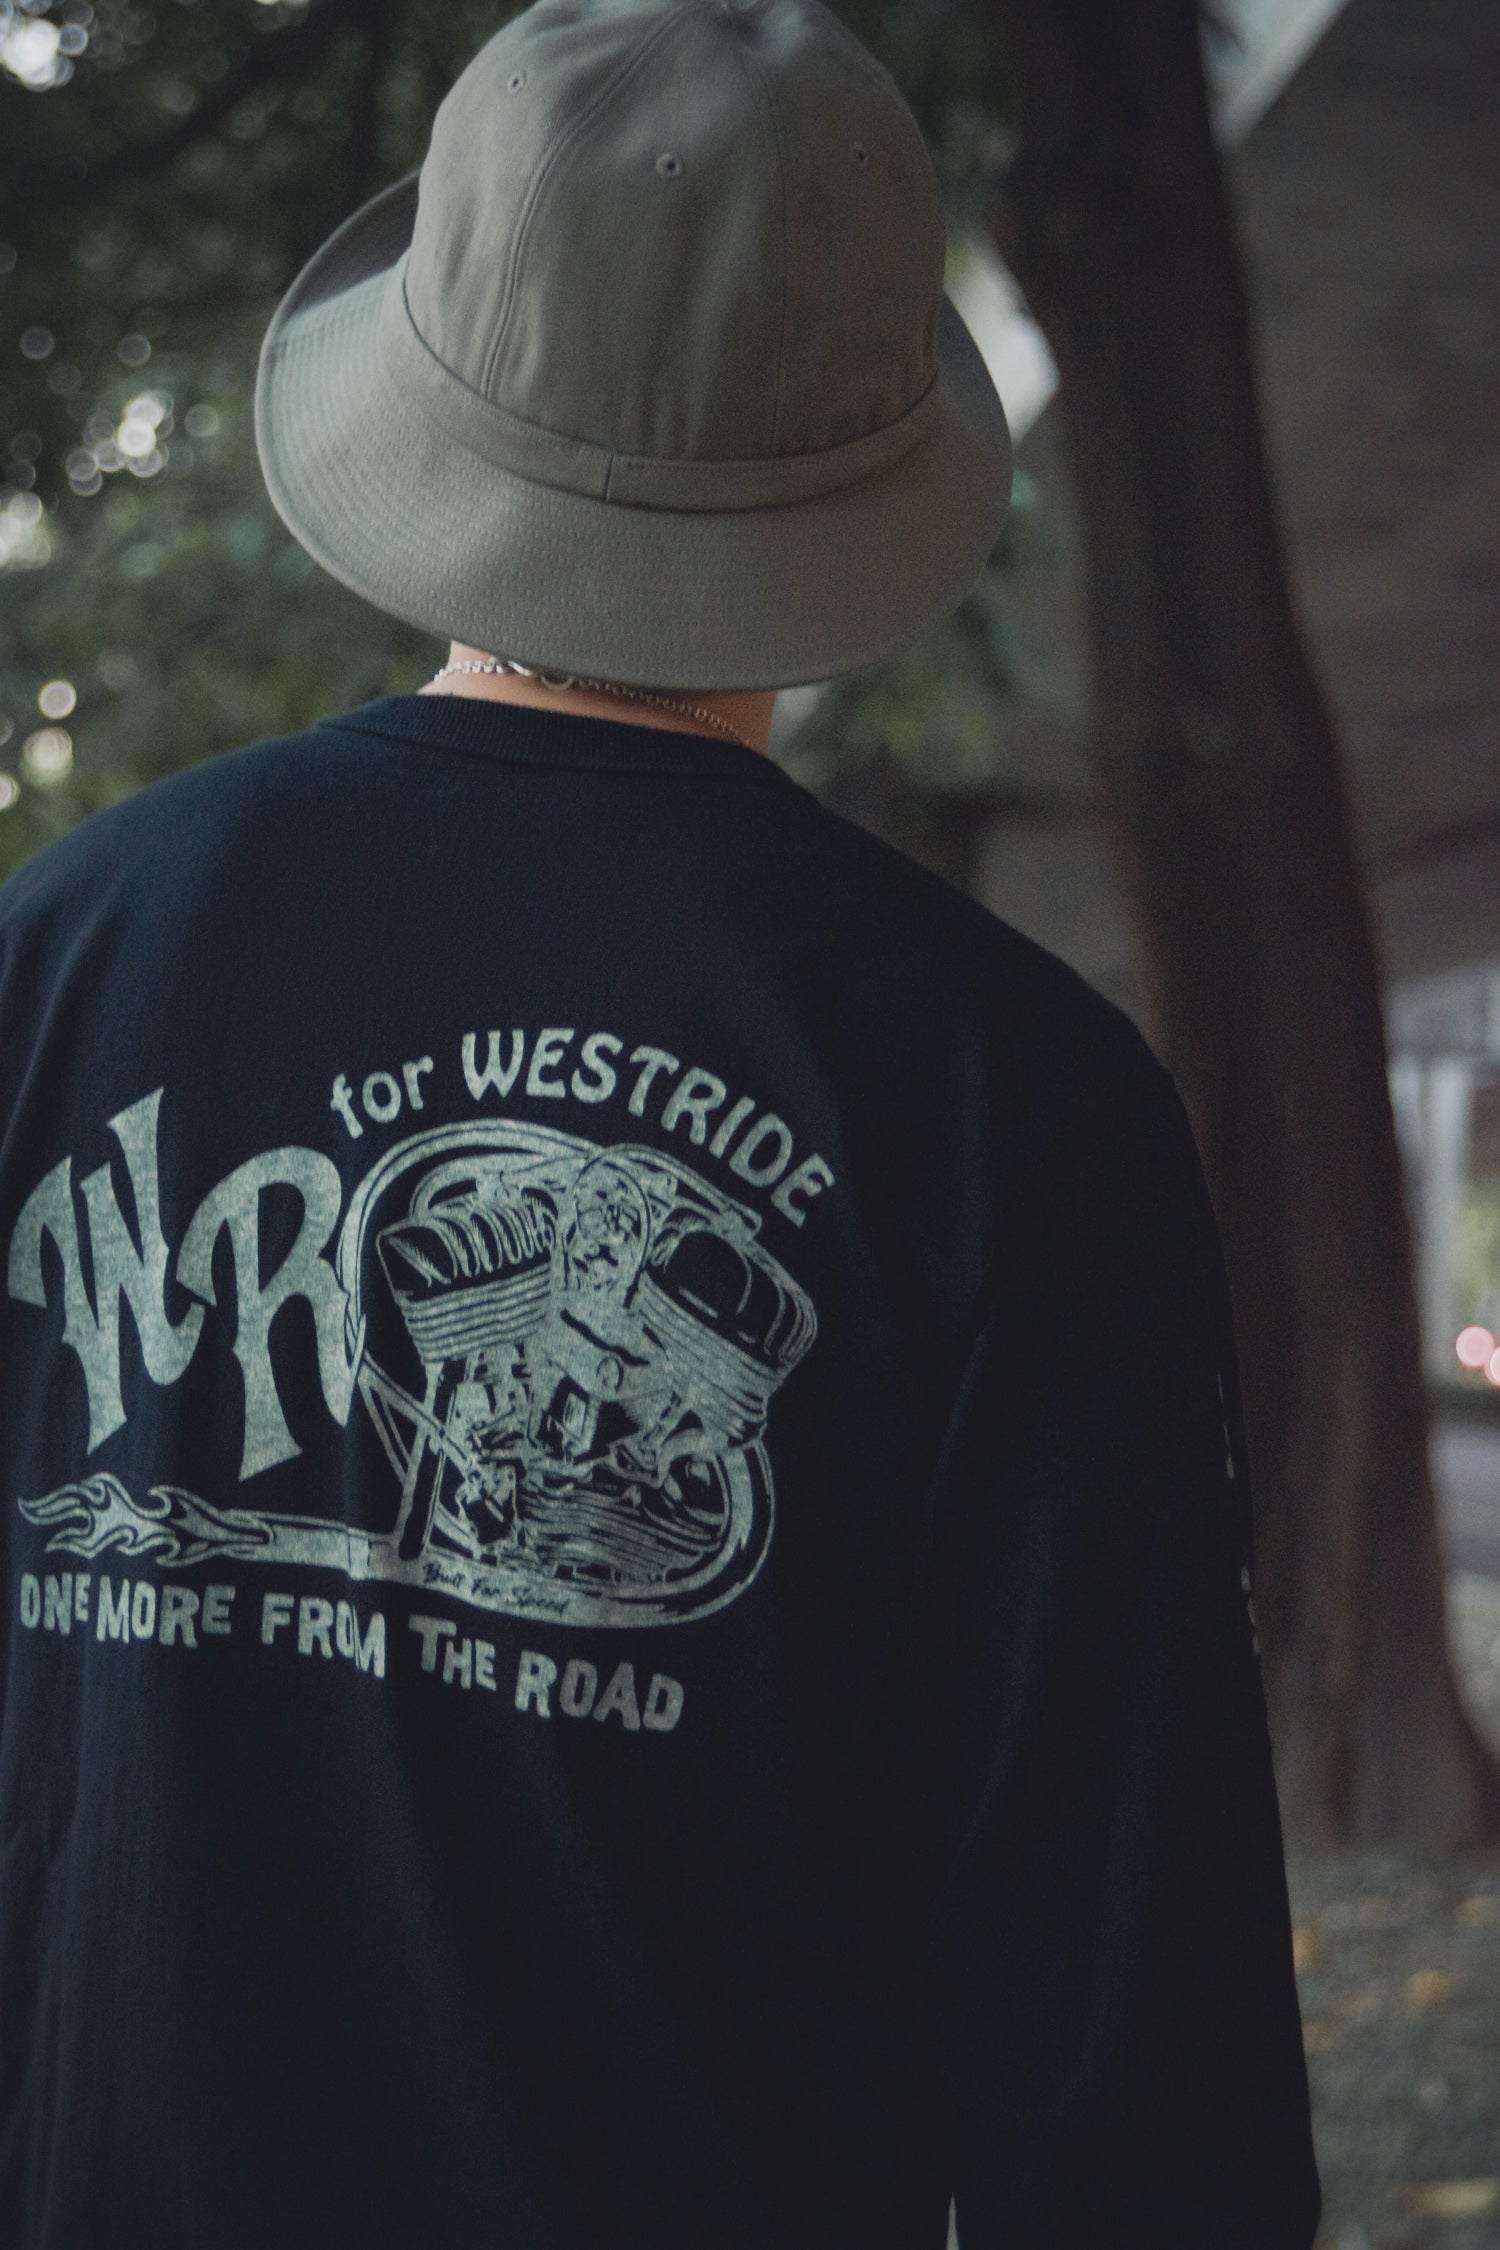 WR FOR WEST RIDE LONG SLEEVE TEE - BLACK - May club